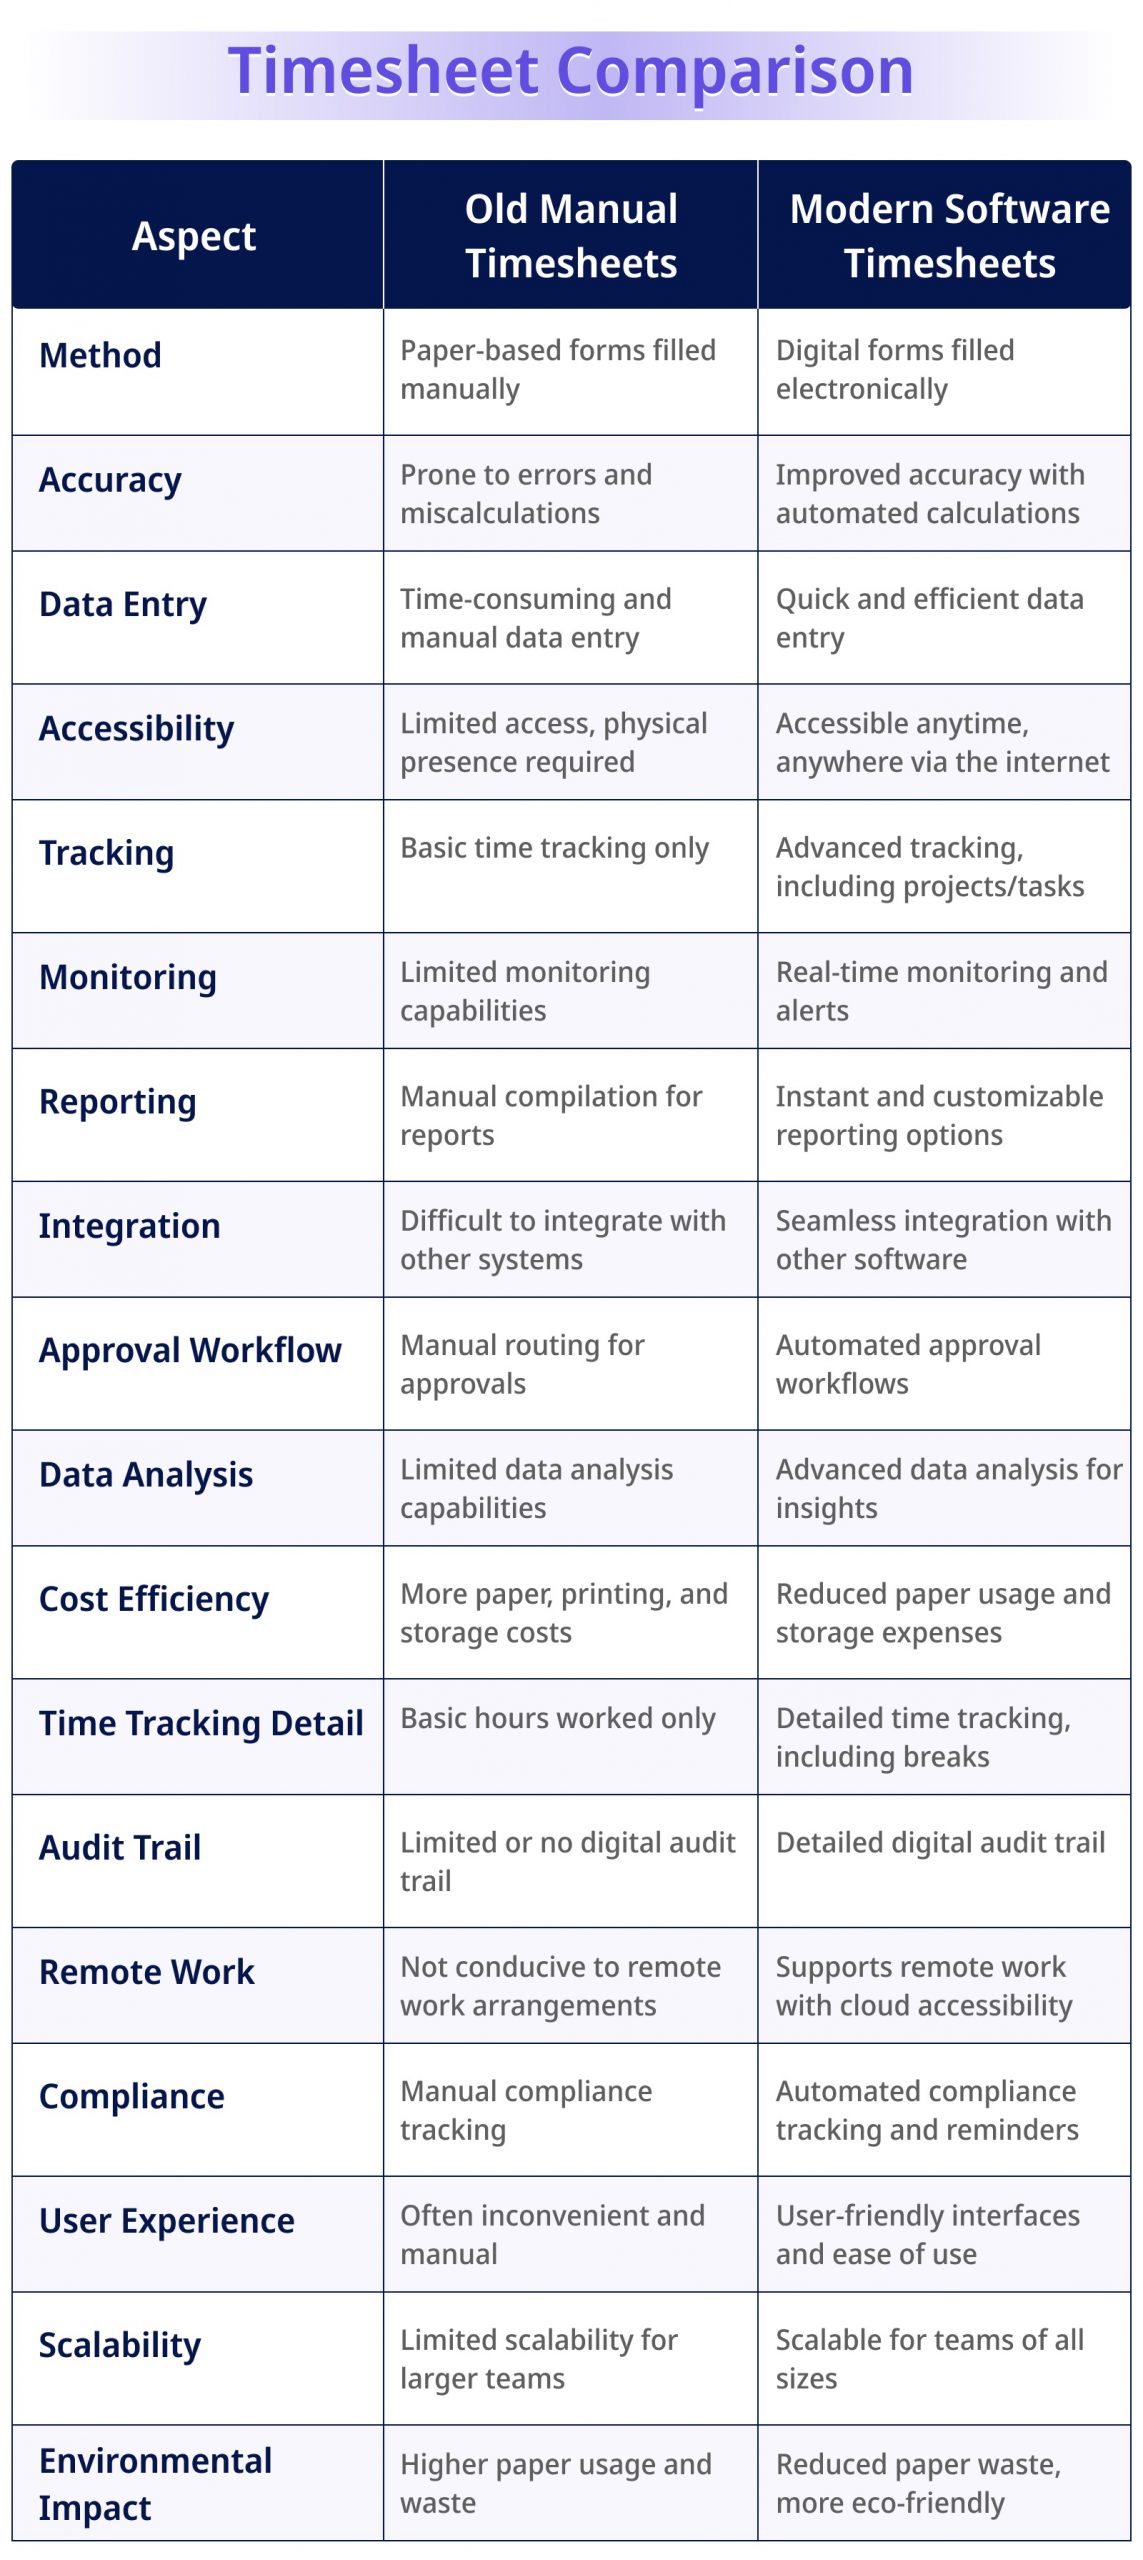 Table INEY- Old Manual Timesheets vs. Modern Software Timesheets